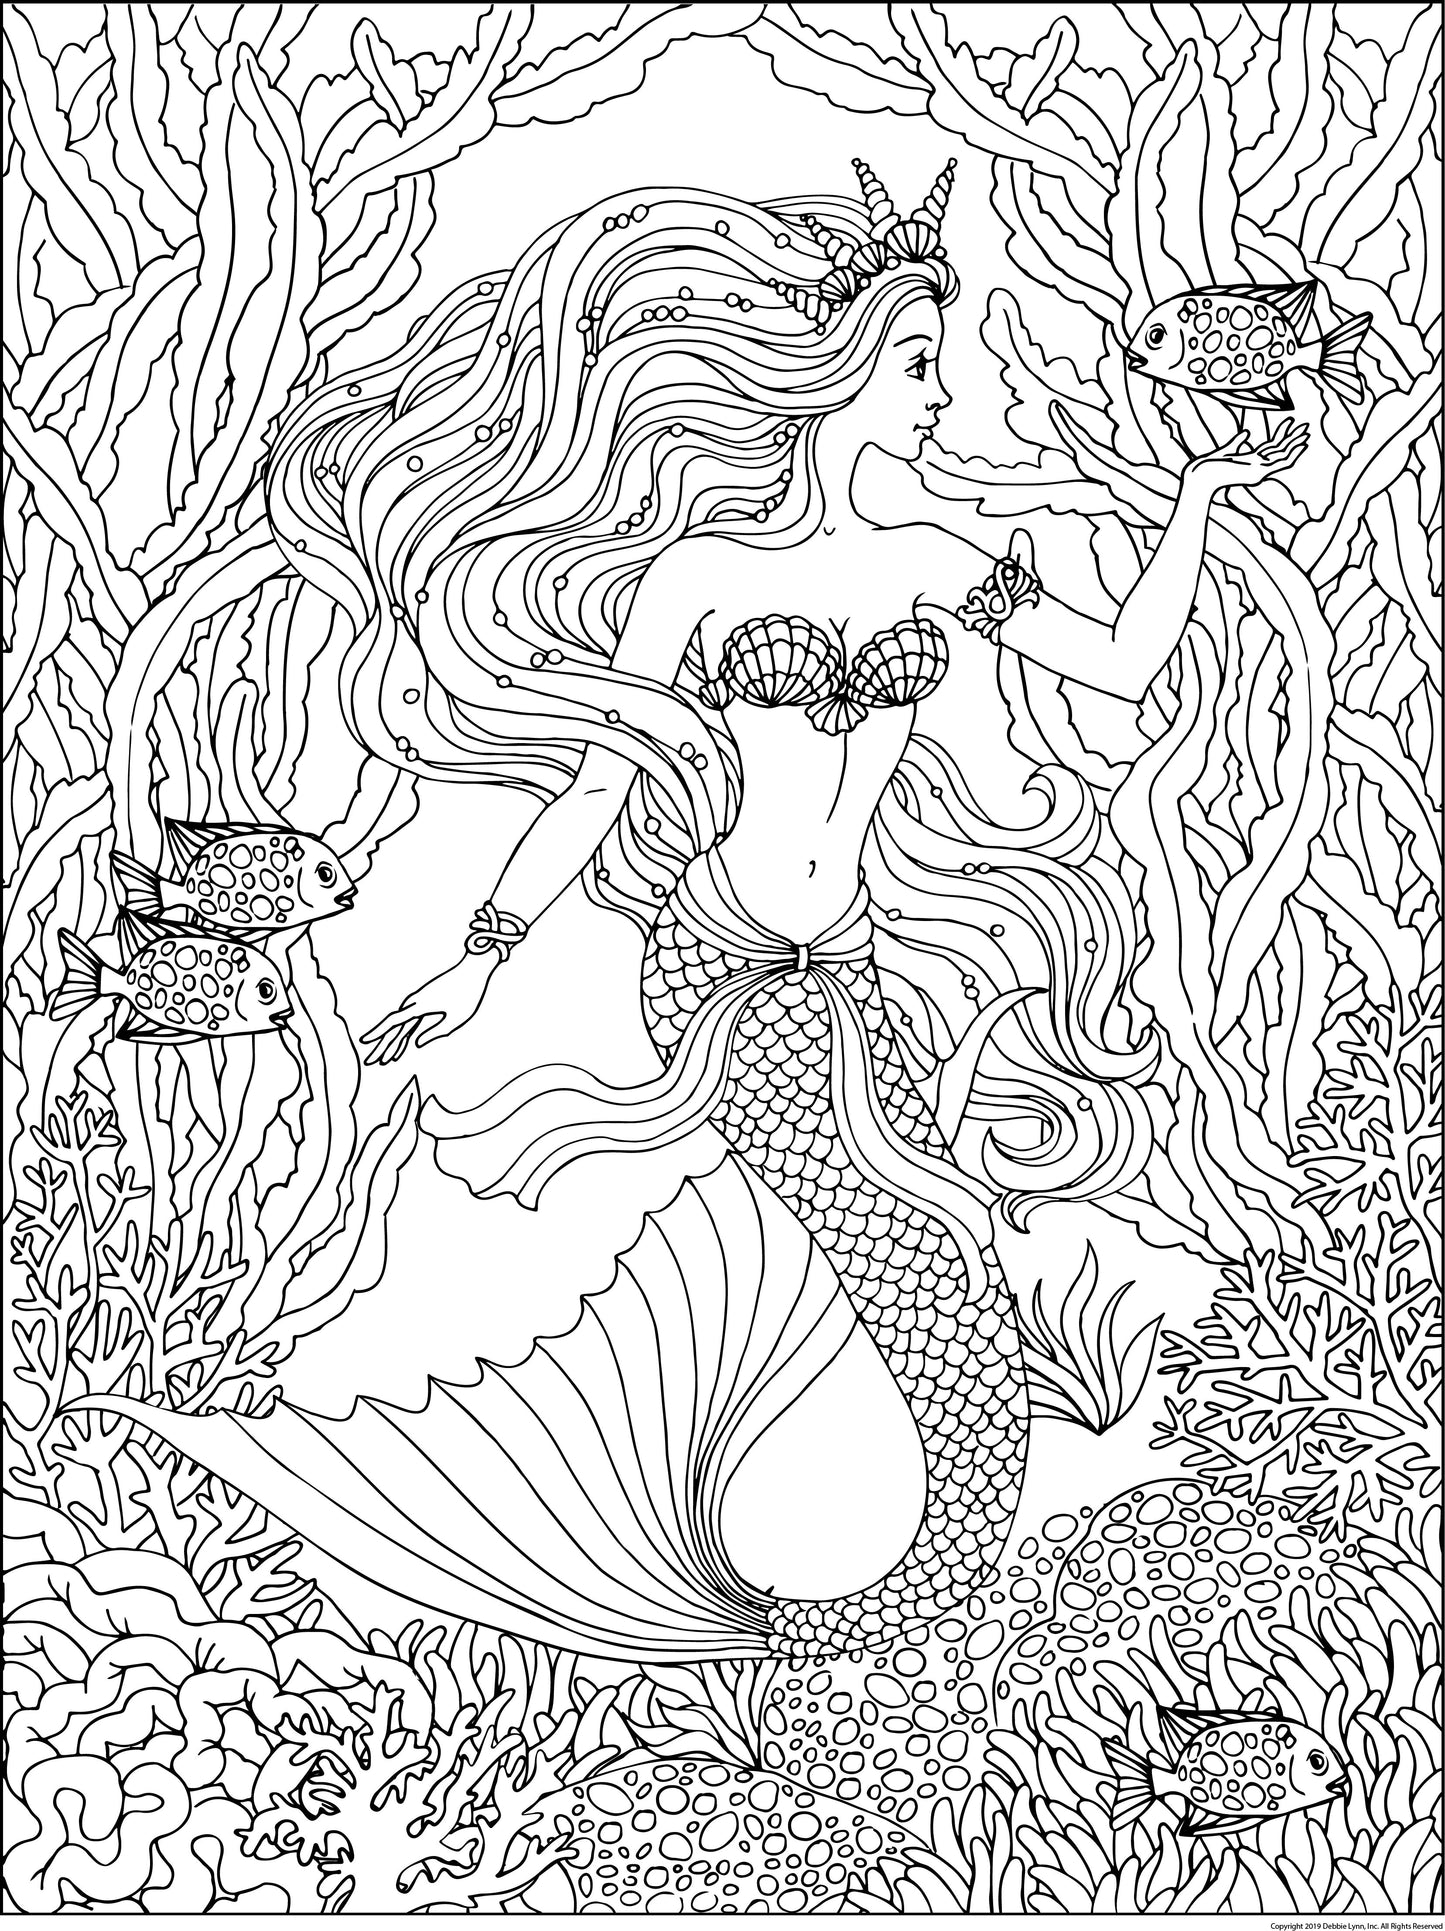 Mermaid Personalized Giant Coloring Poster 46"x60"